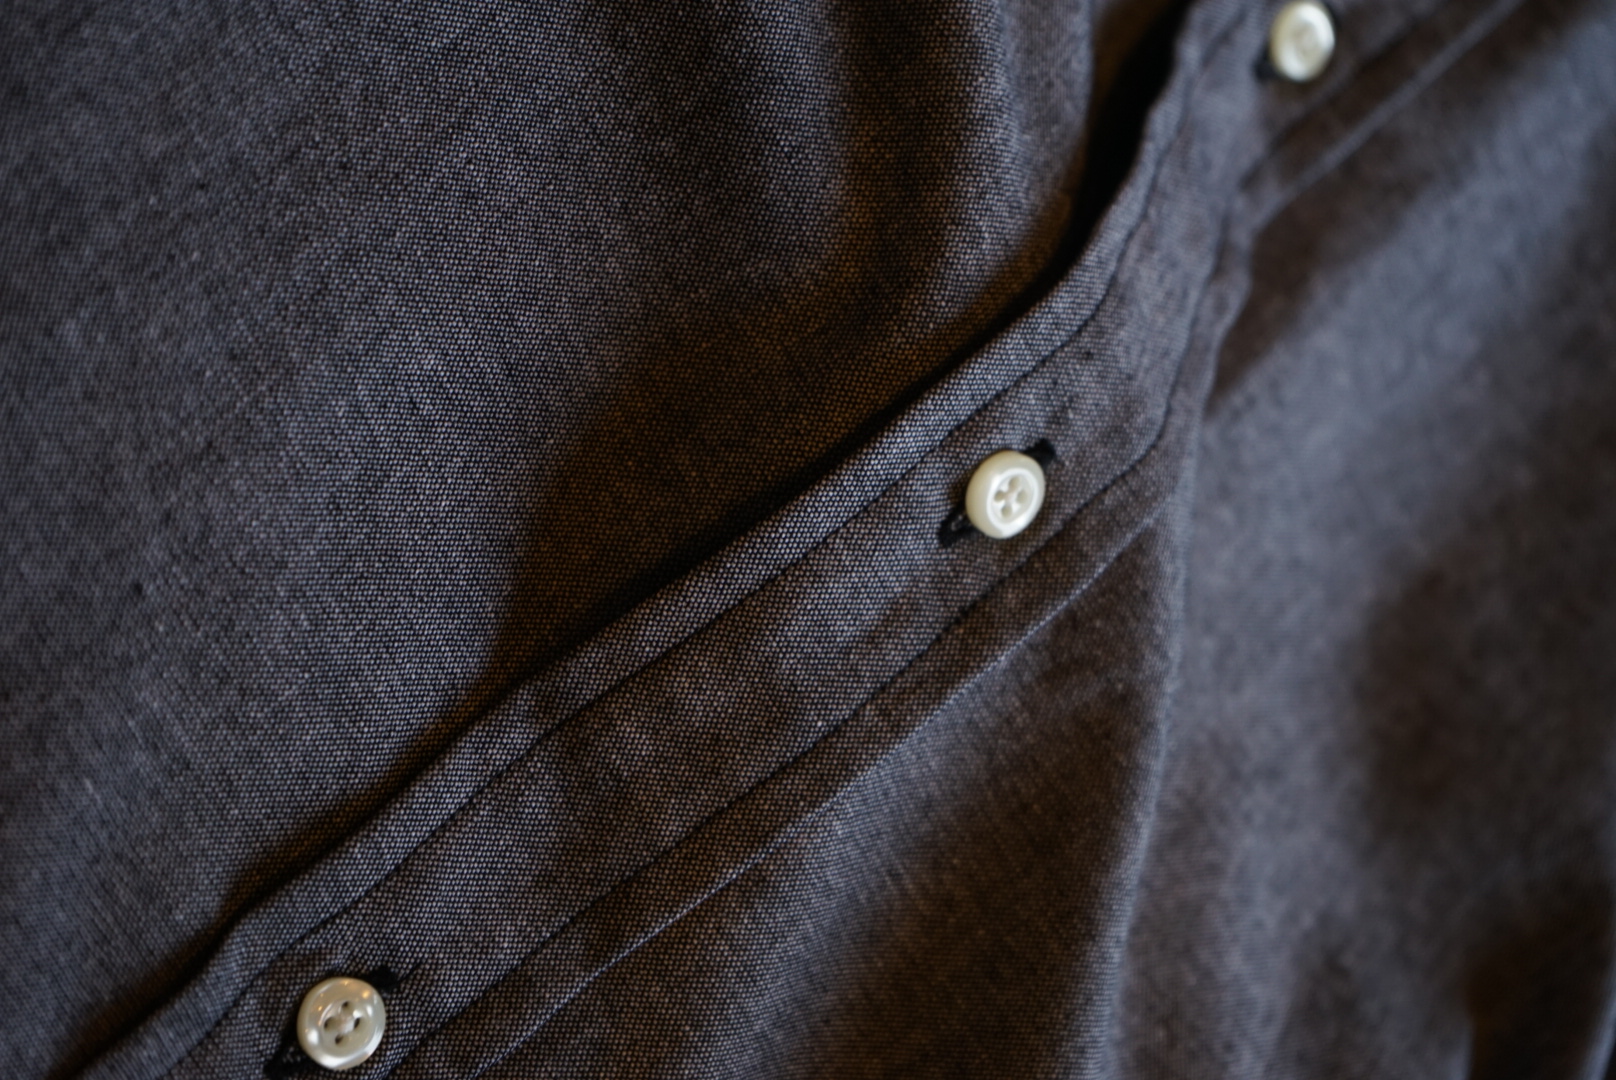 6 BUTTON B.D SHIRTS - ARCH EXCLUSIVE